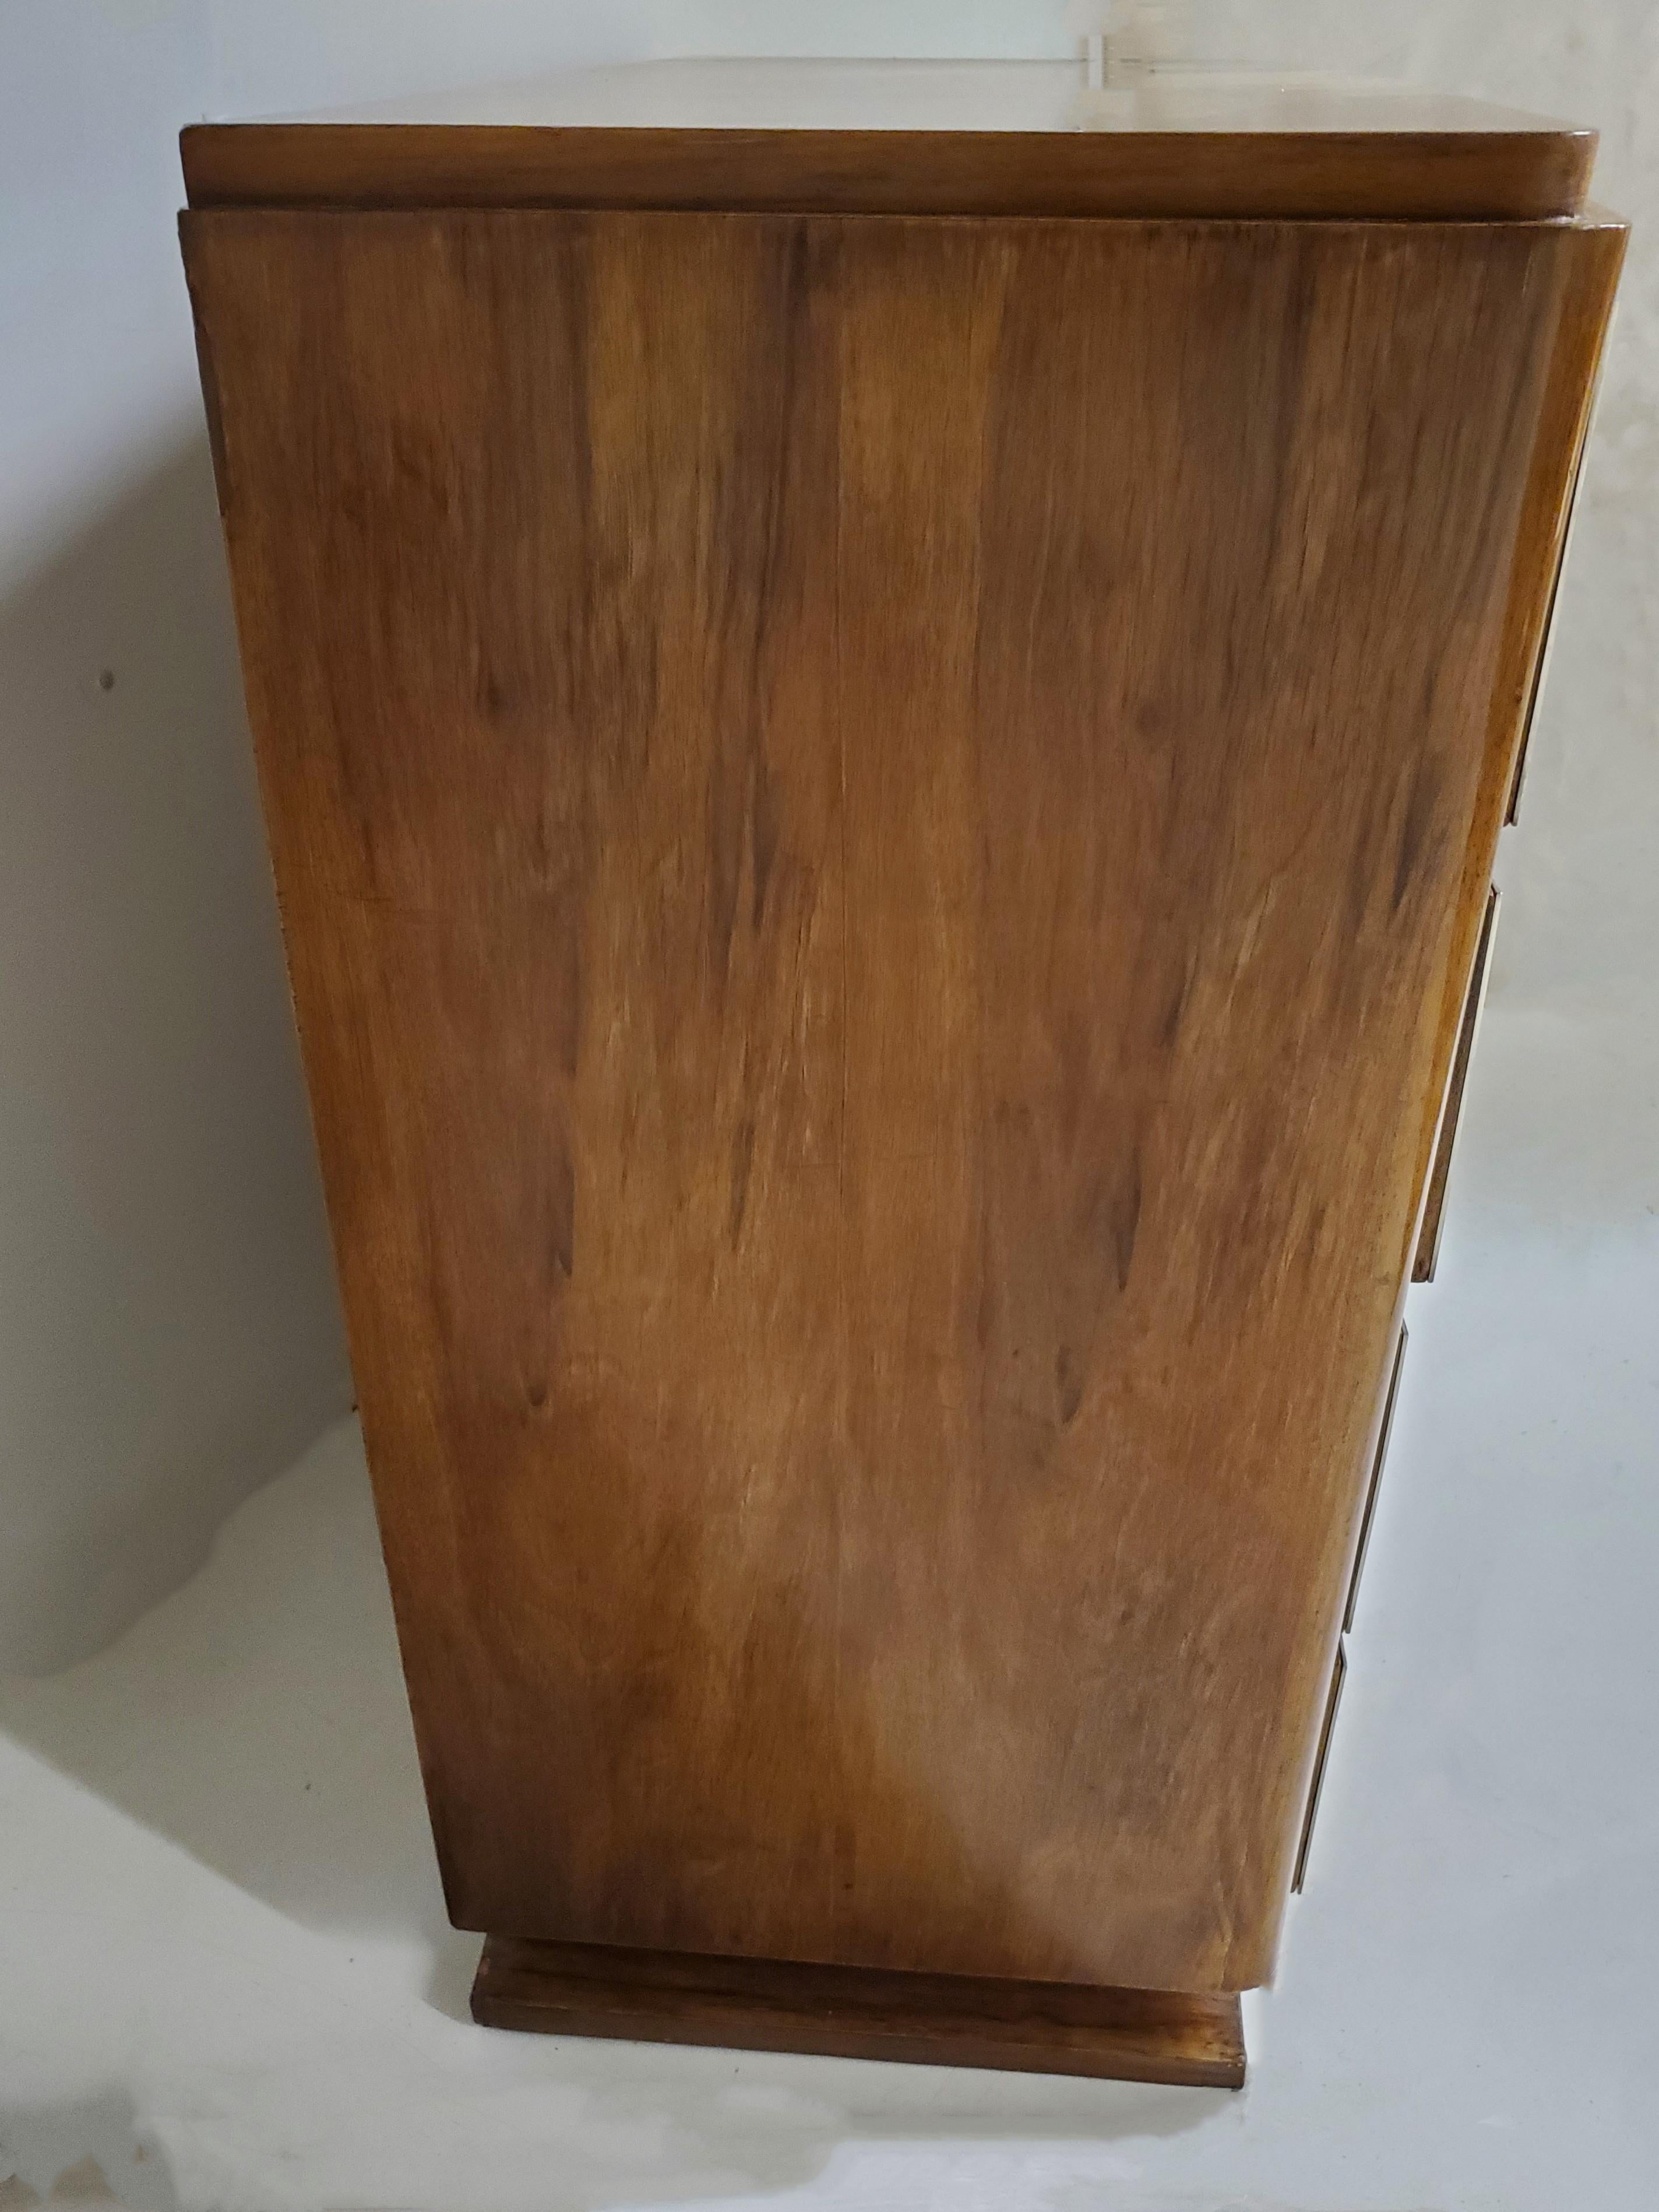 French Art Deco Burl Walnut Chest of 4 Drawers with Polished Nickel Hardware For Sale 7